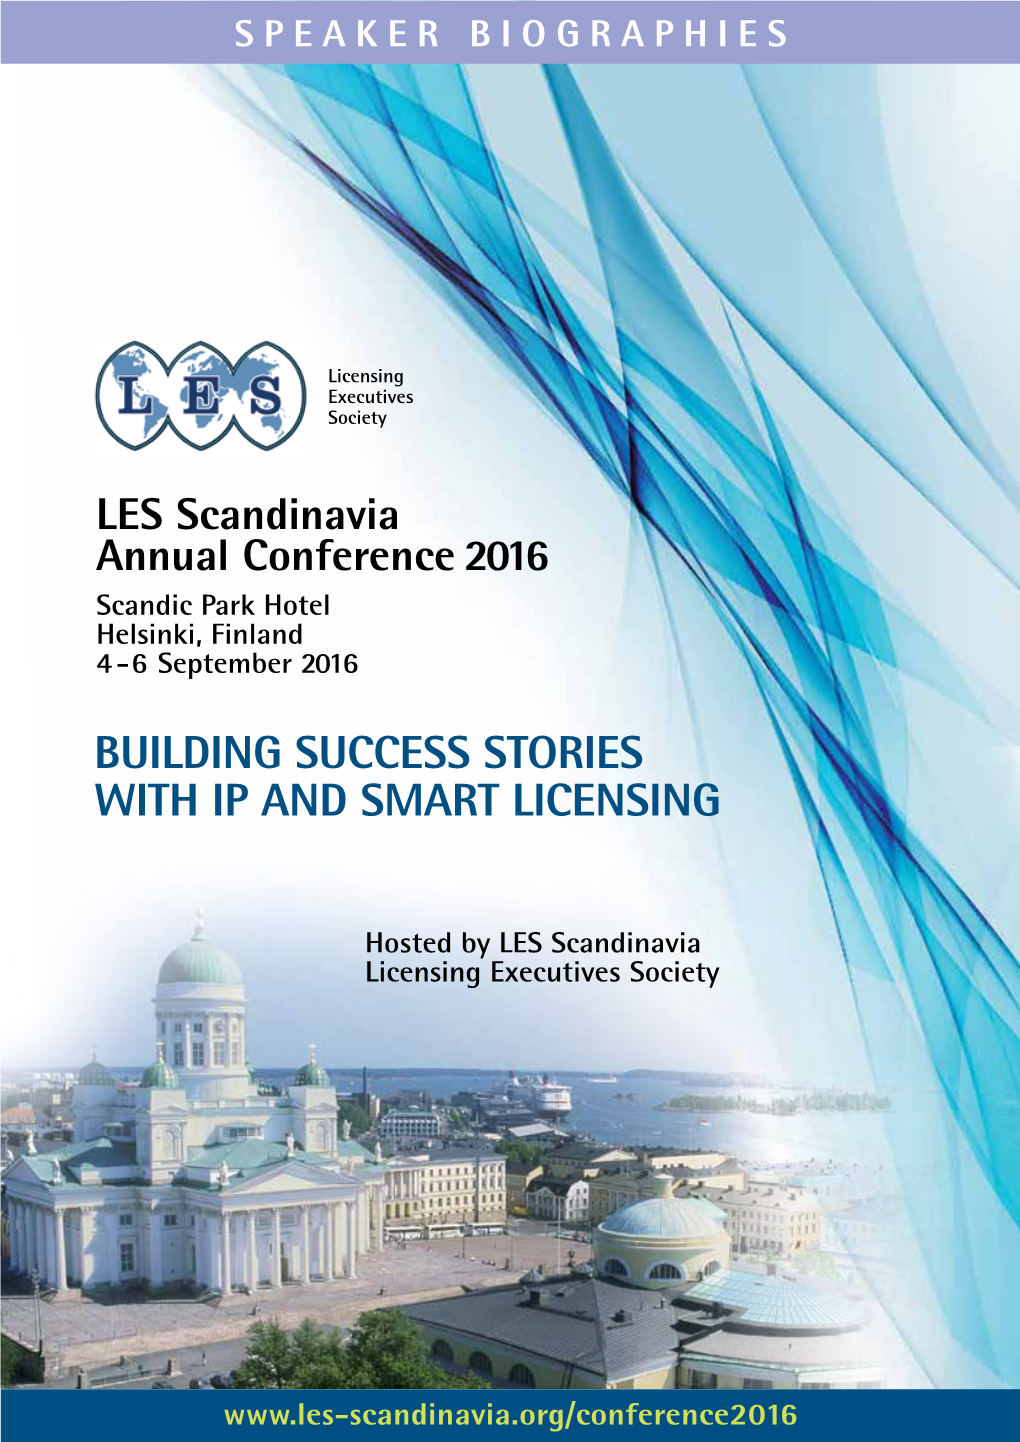 Building Success Stories with Ip and Smart Licensing